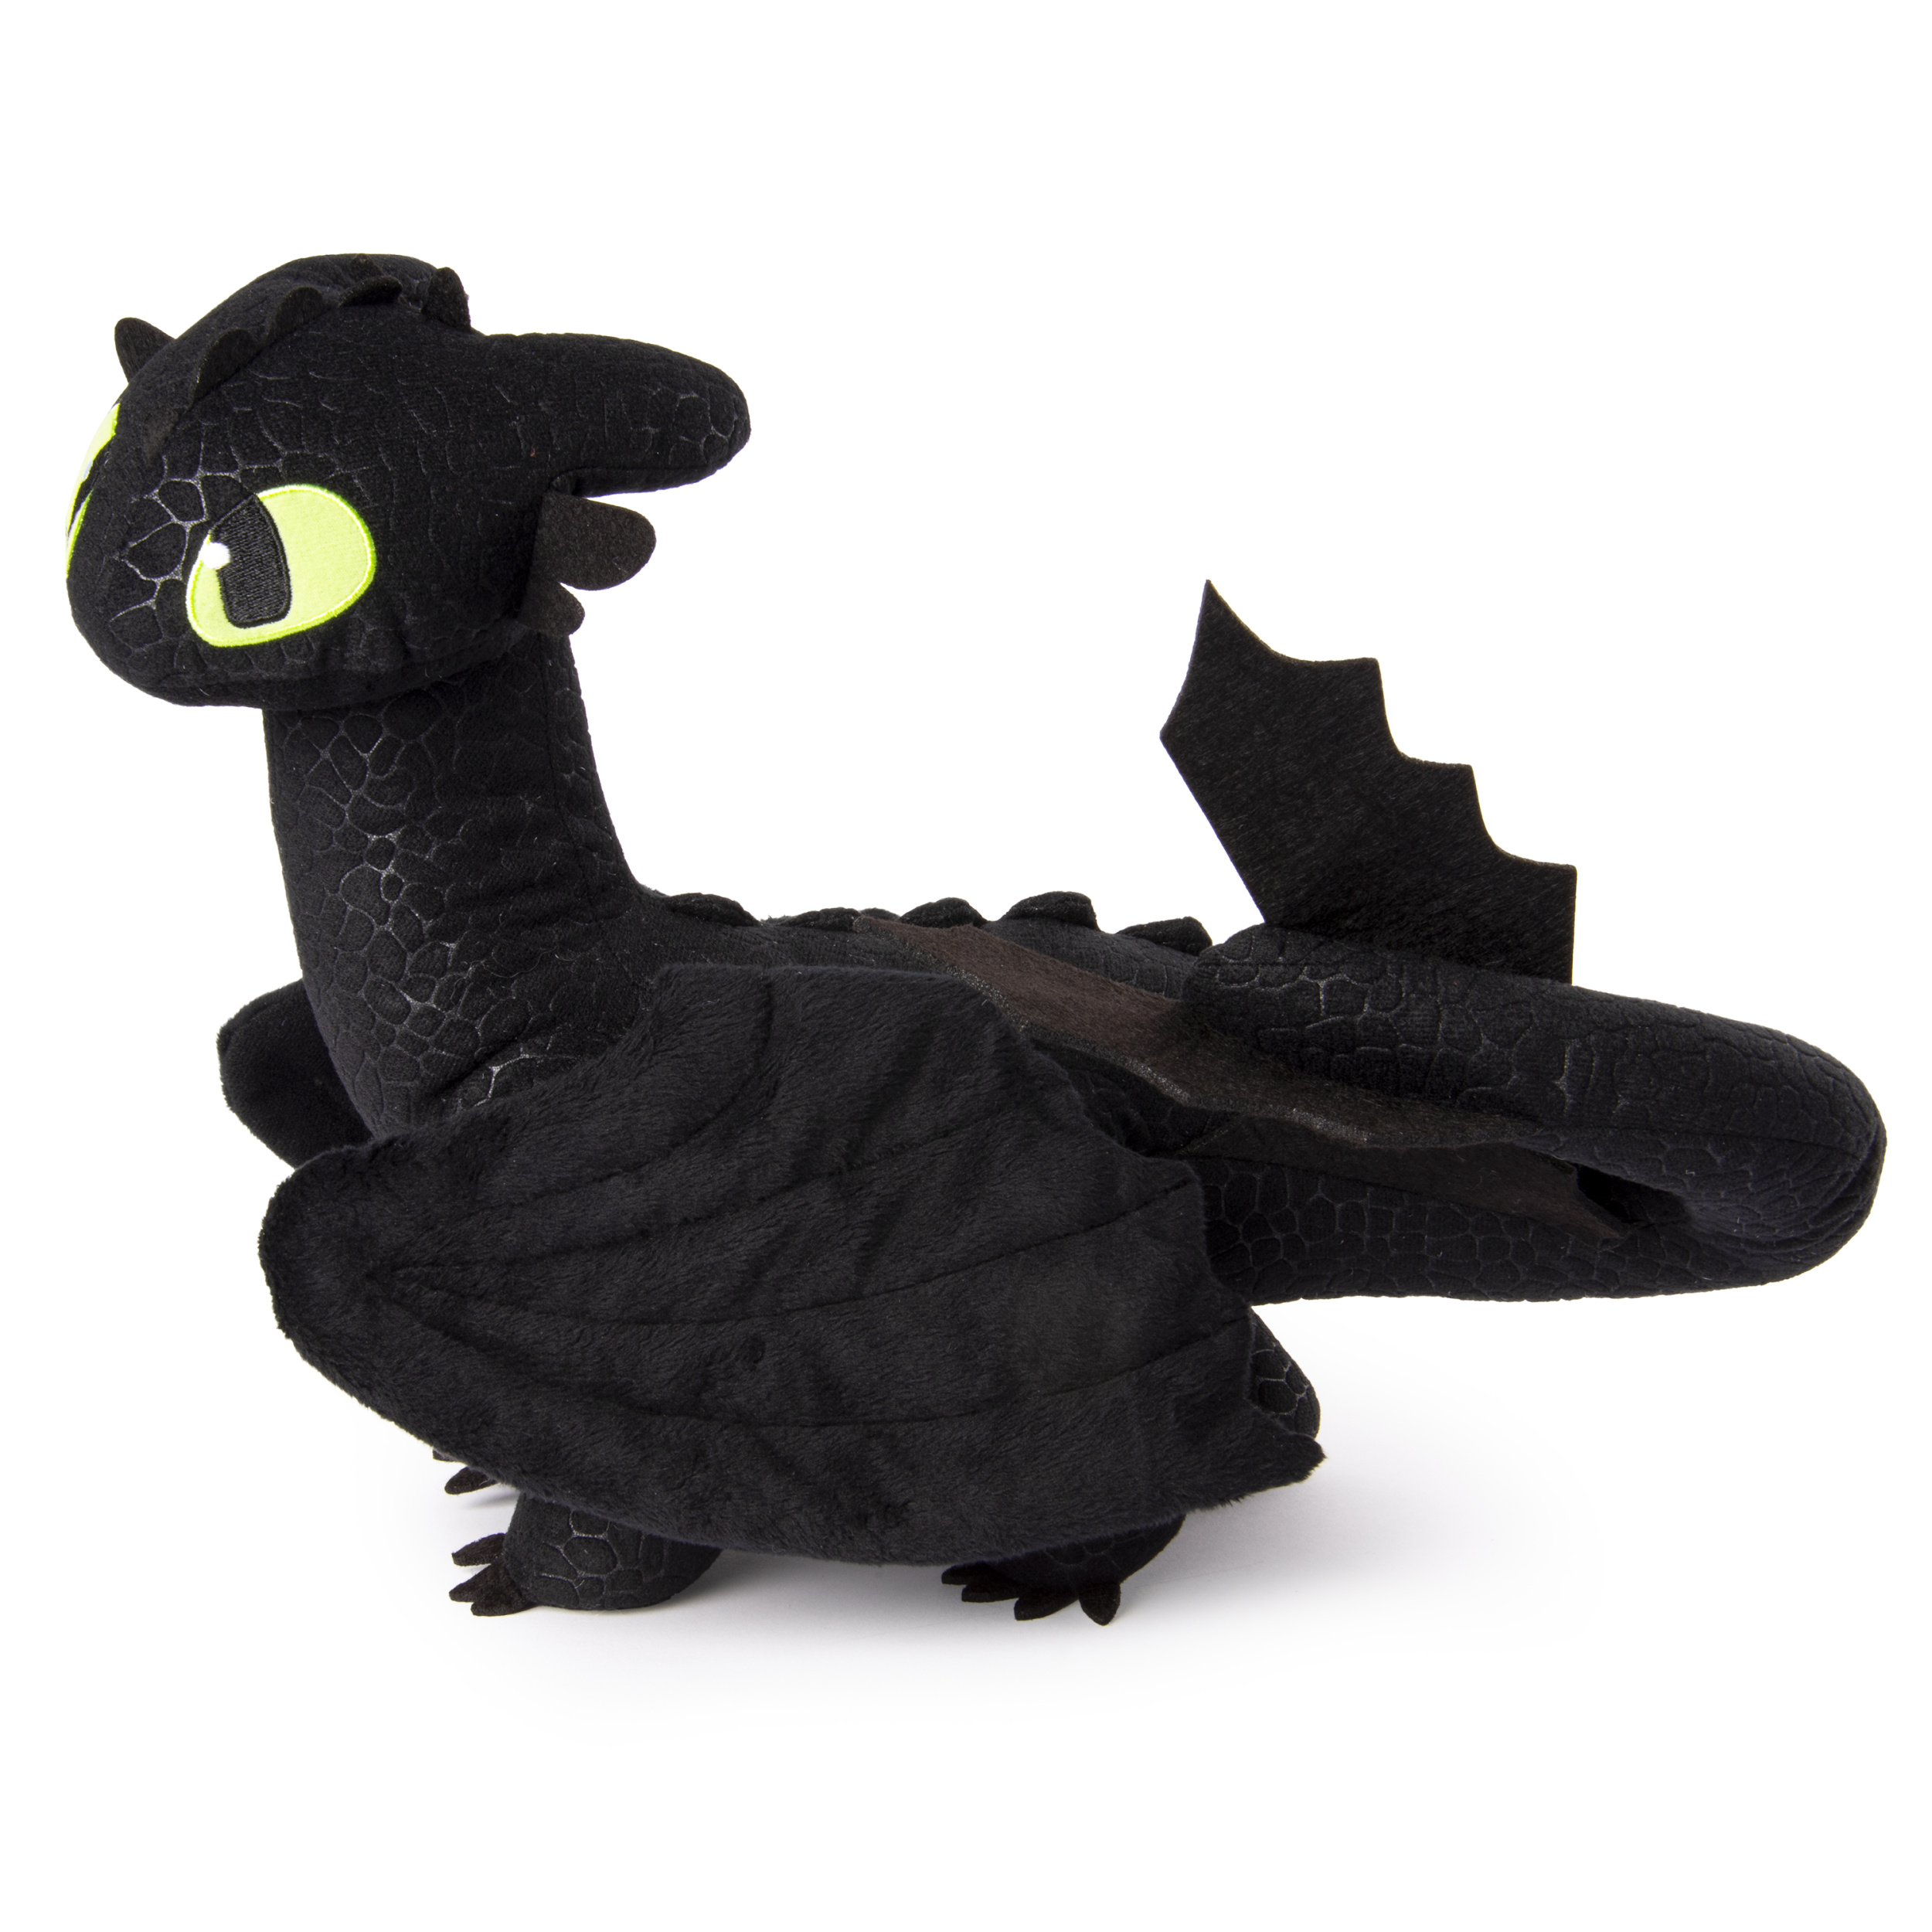 DreamWorks Dragons, Toothless 14-inch Deluxe Plush Dragon, for Kids Aged 4 and up - image 3 of 3